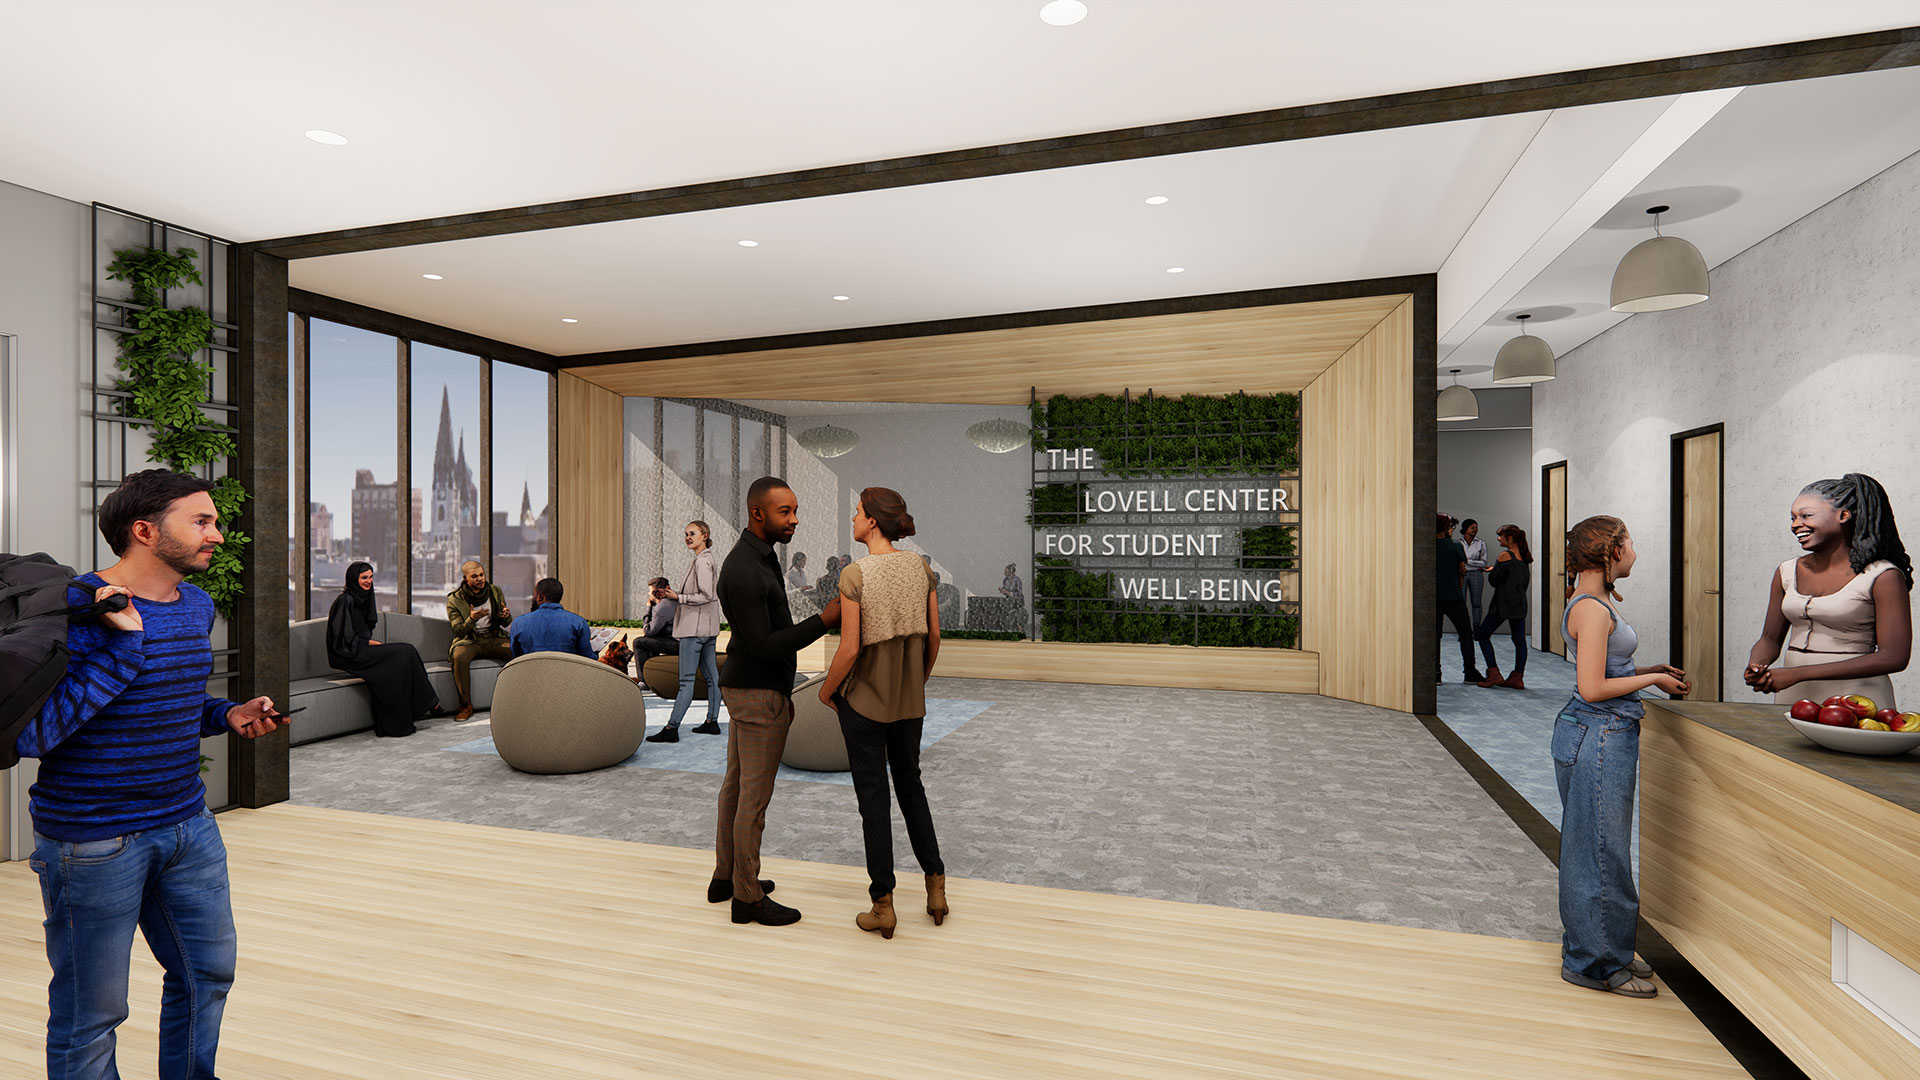 A rendering of the Lovell Center for Student well-being.